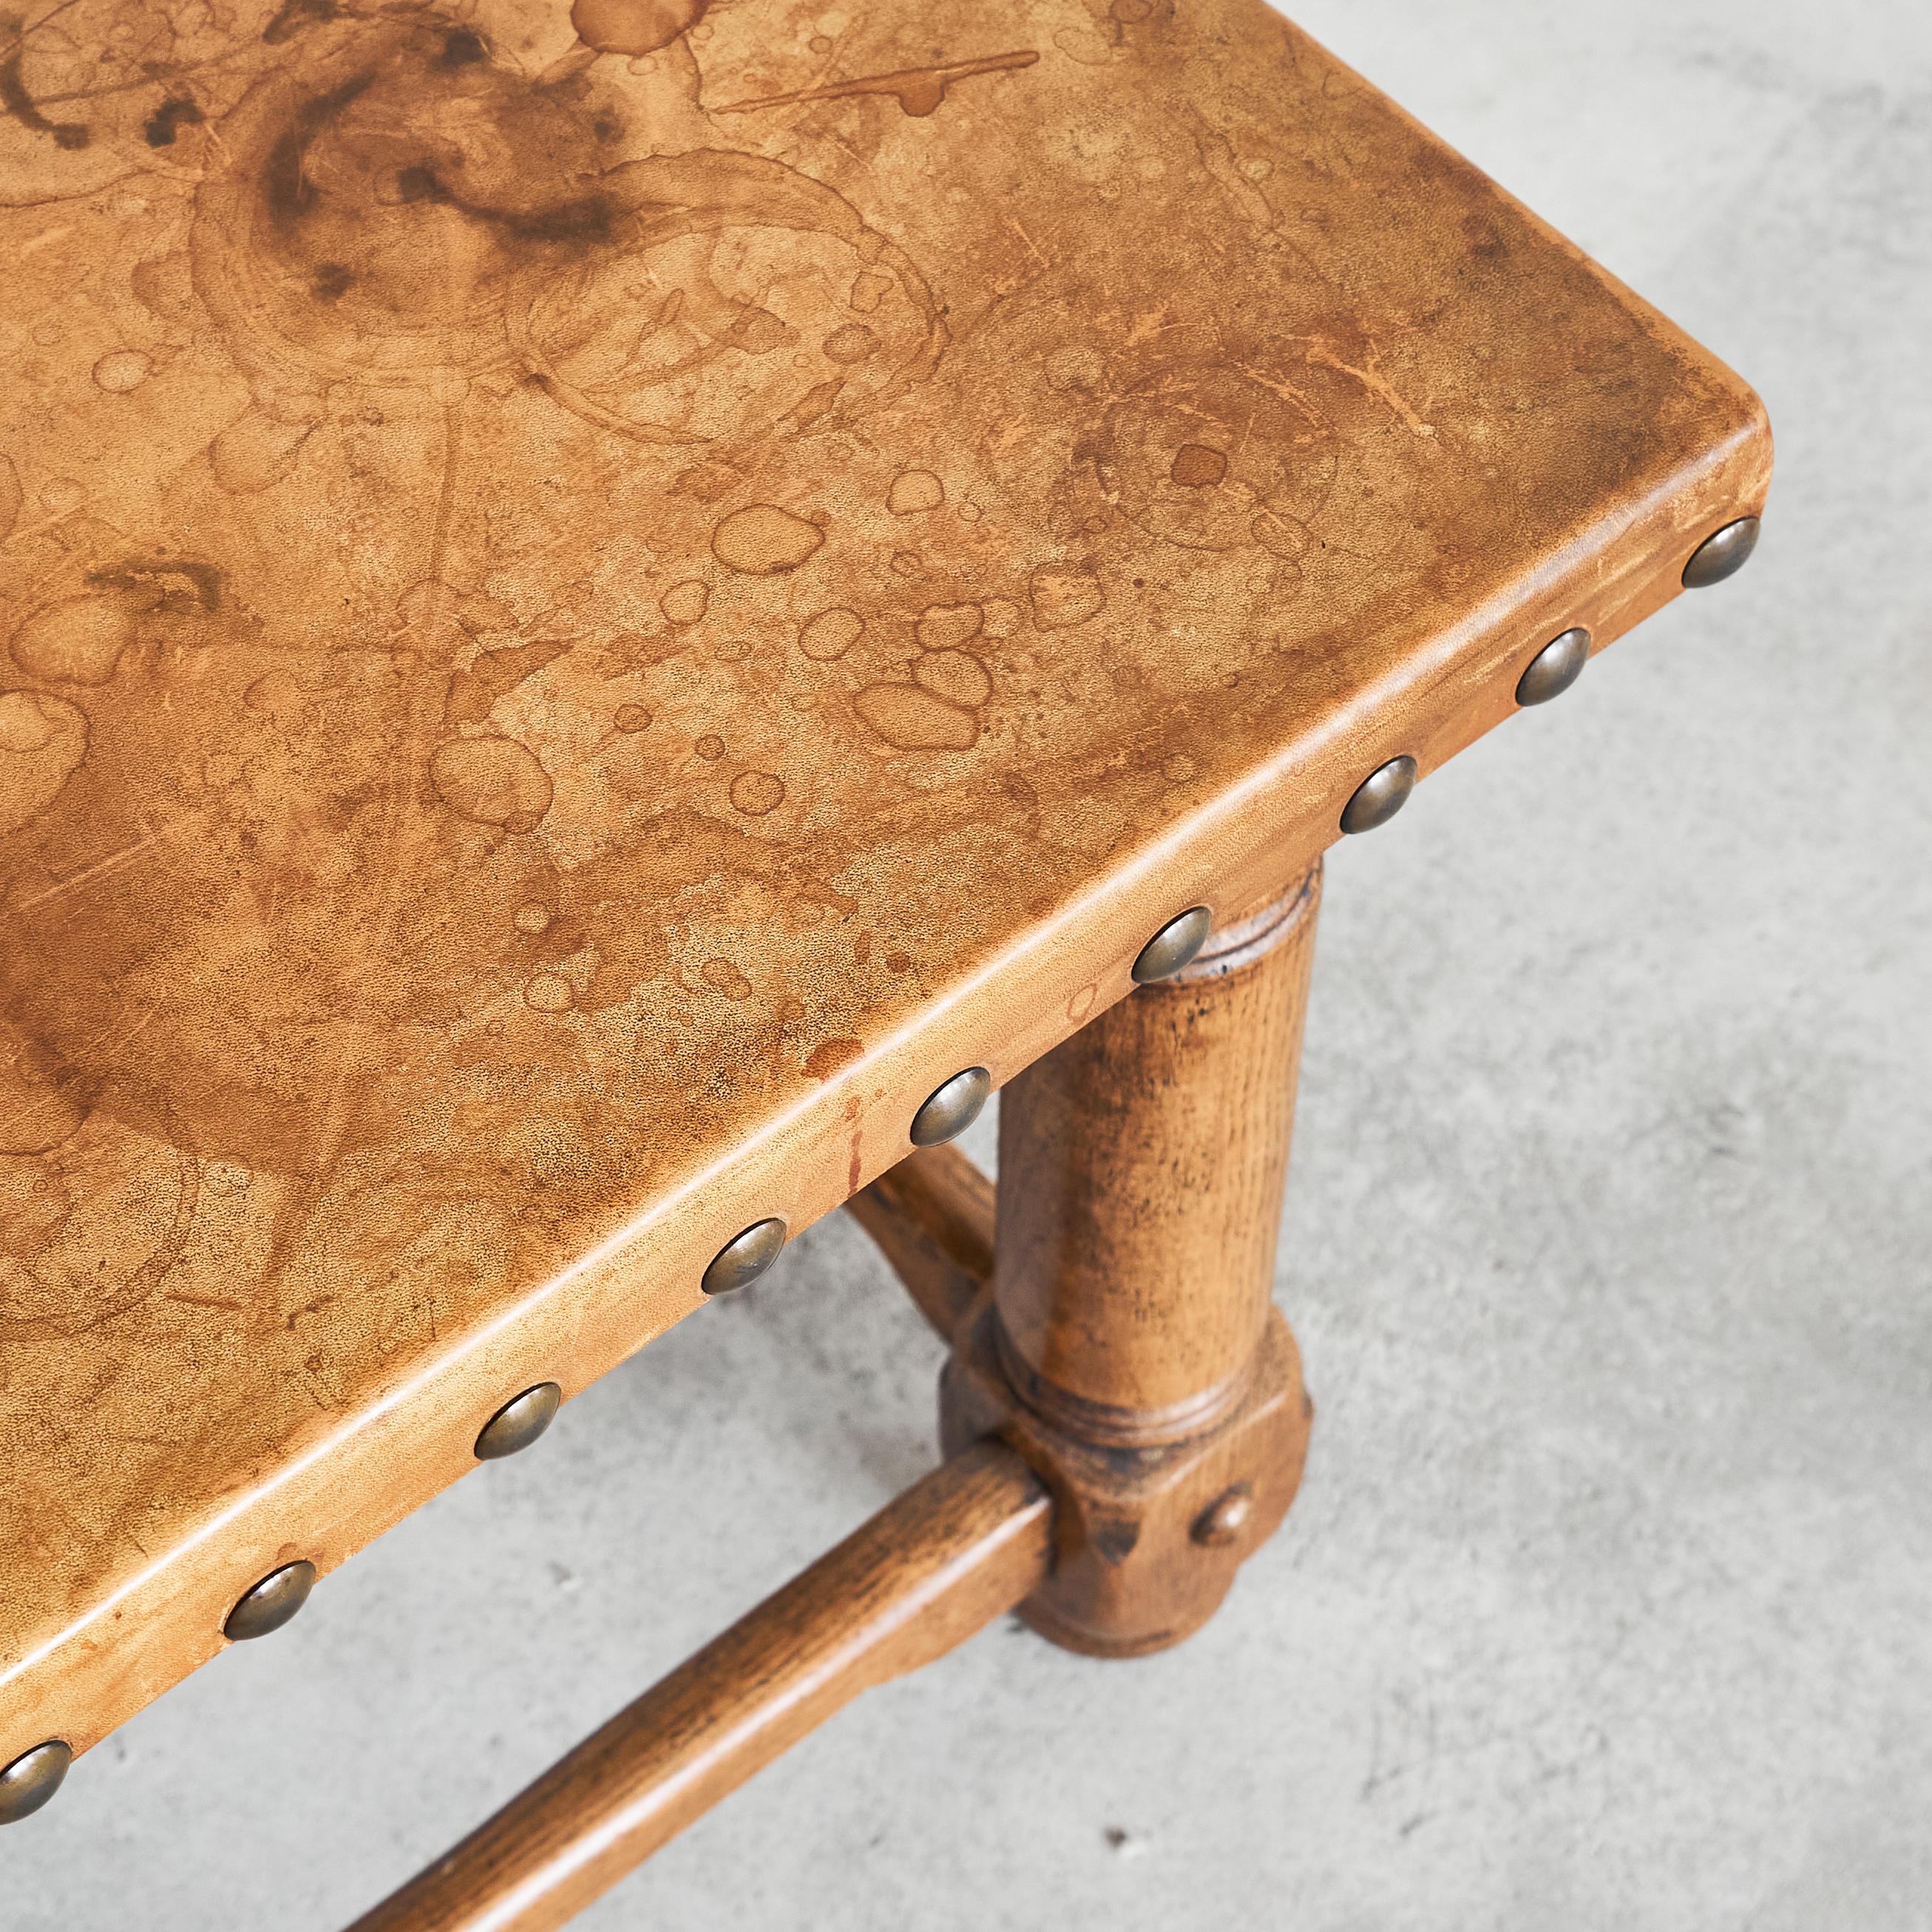 Spanish Brutalist Coffee Table in Solid Oak, Metal and Patinated Leather 1940s For Sale 3